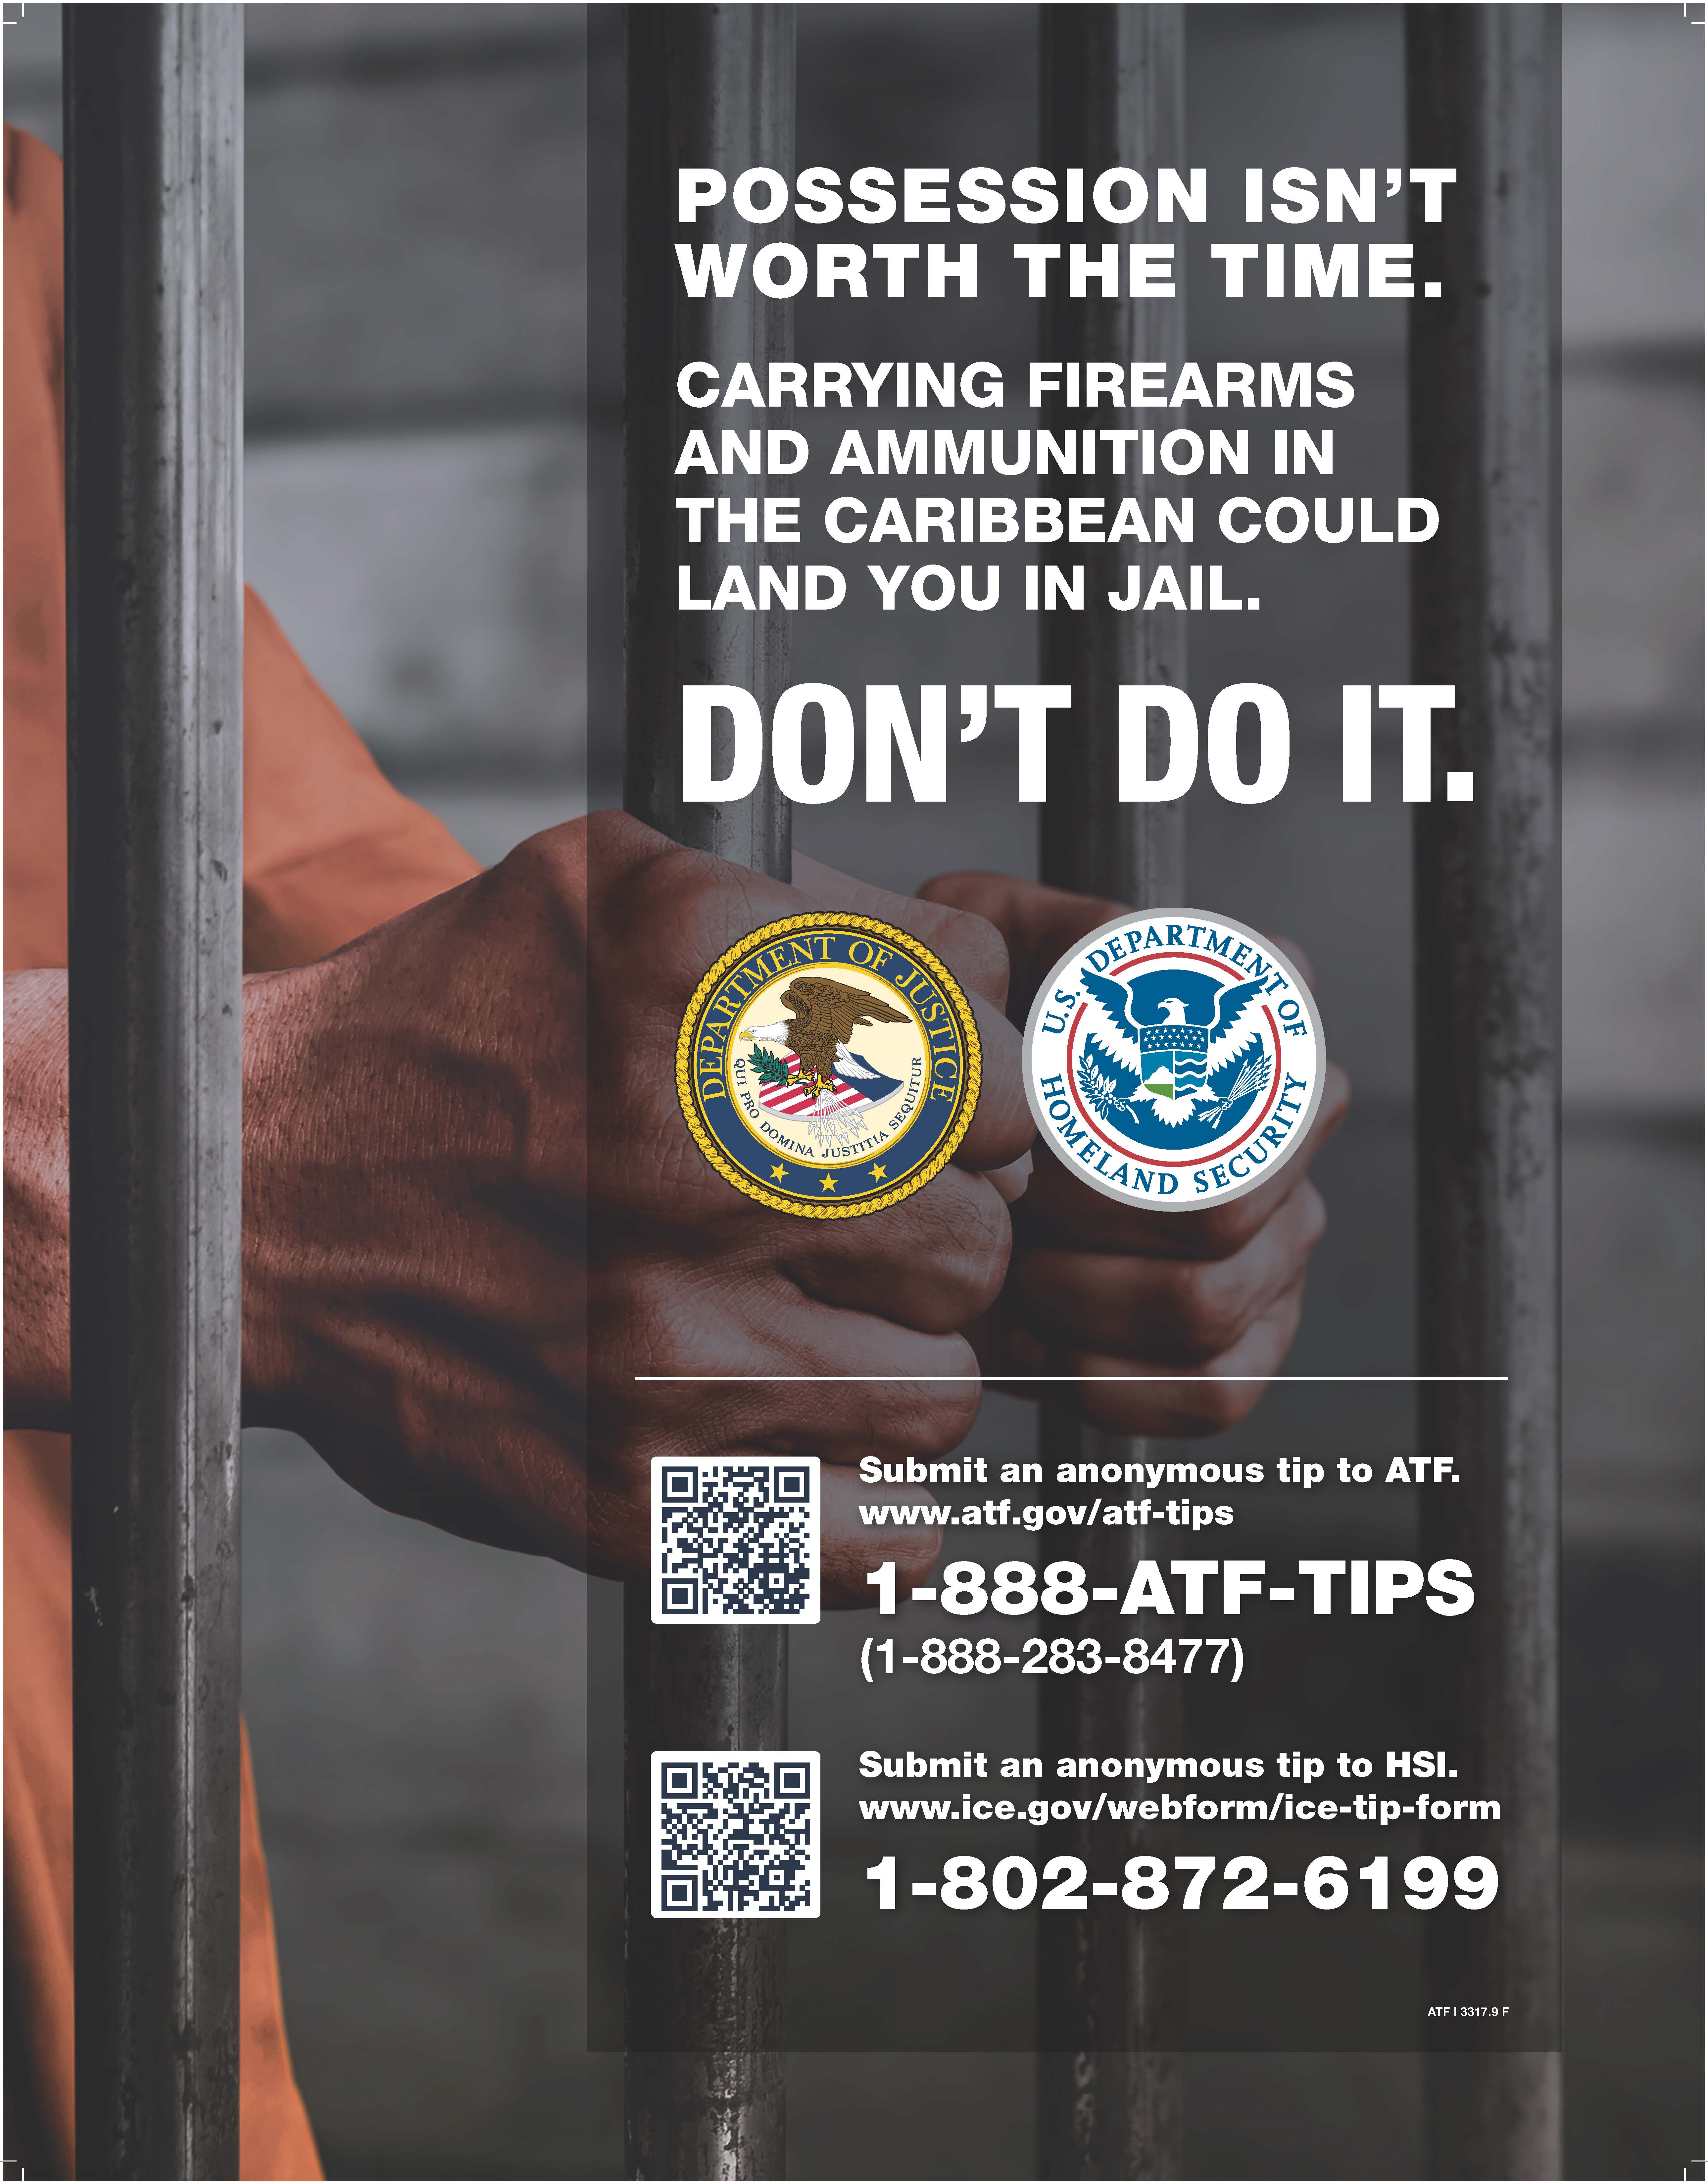 ATF I 3317.9 FvCARICOM Anti-Firearms Trafficking Campaign Poster: Person in an orange jumpsuit holding onto jail cell bars